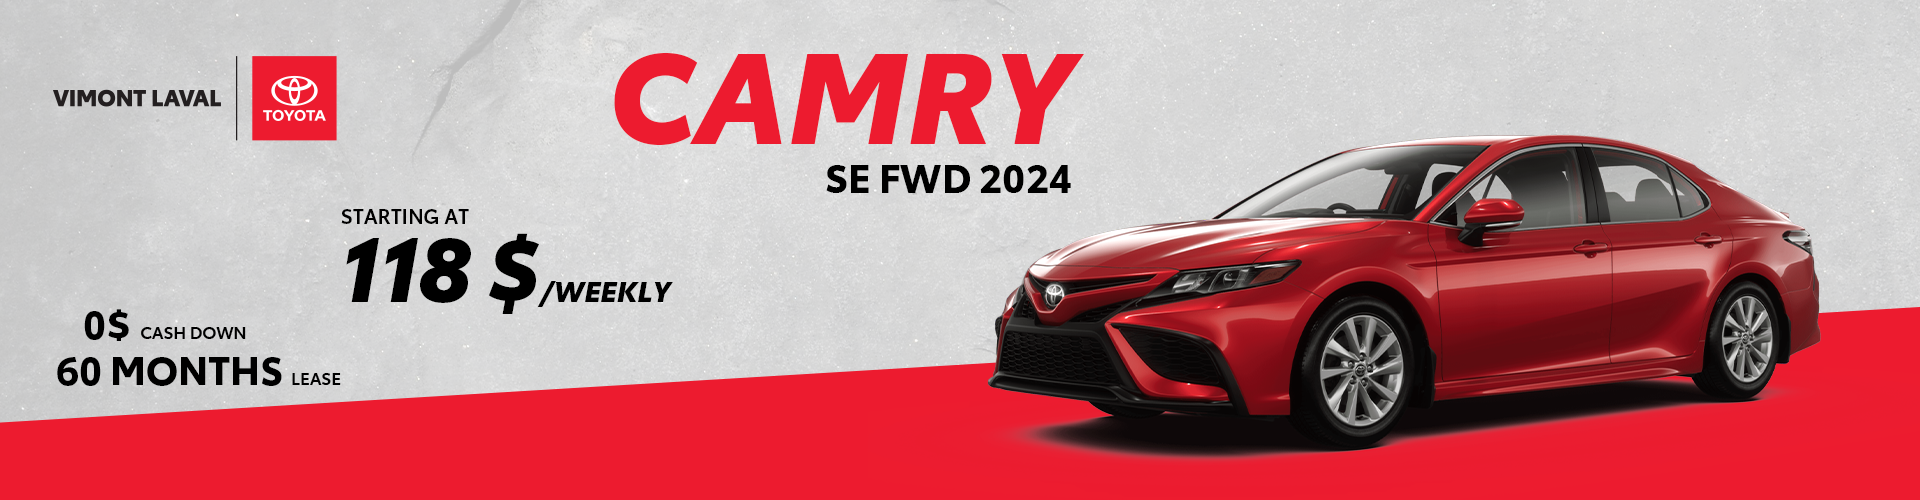 2024 March Promotion Camry